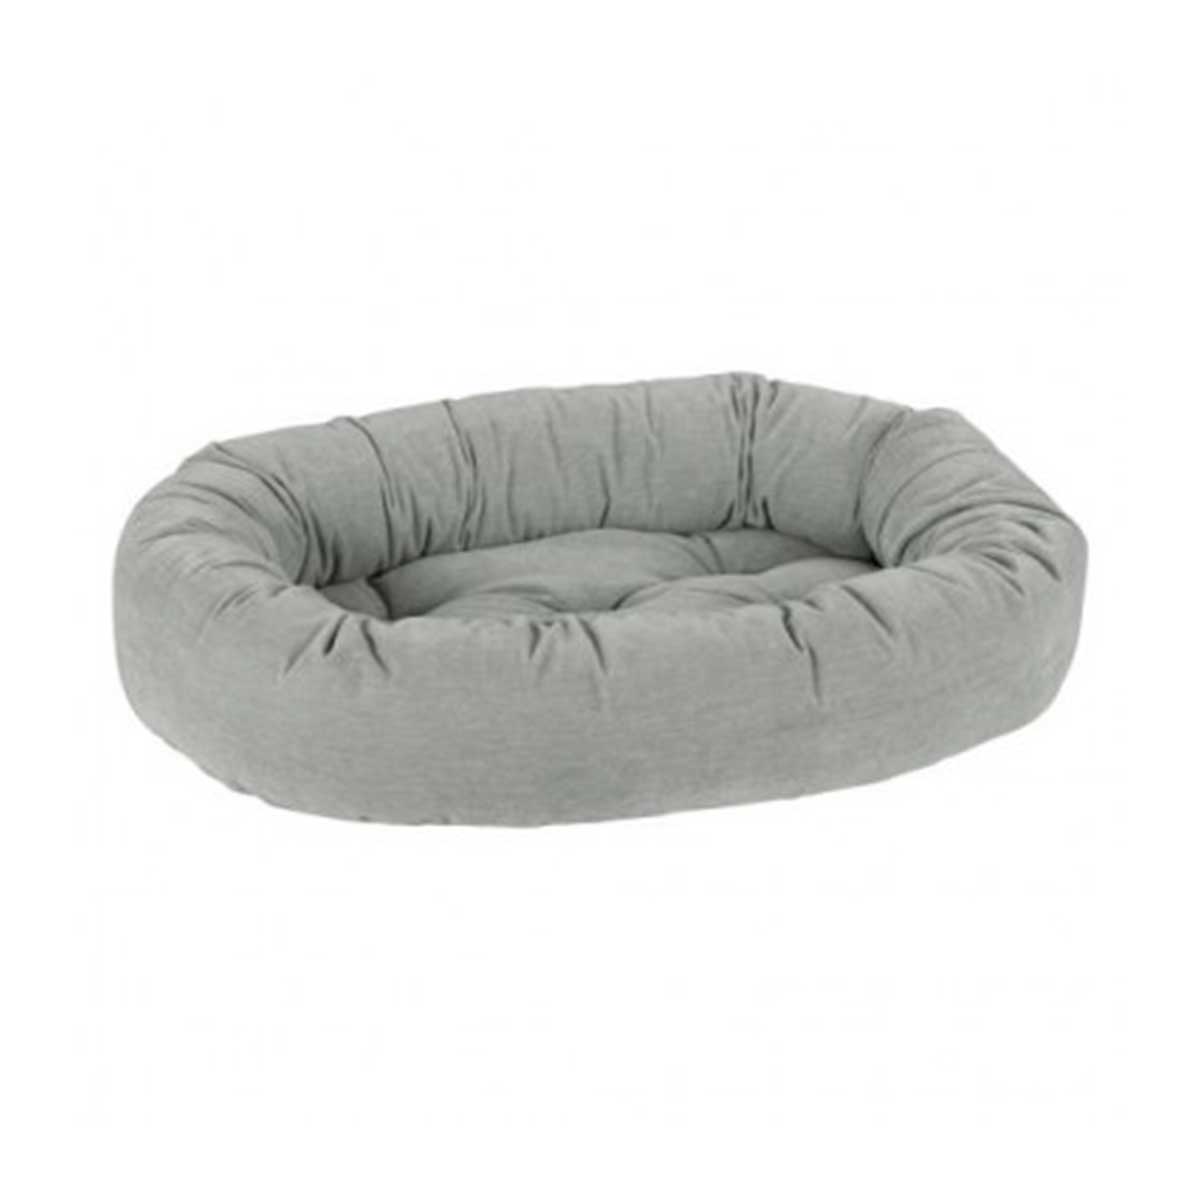 Donut Bed Oyster Microvelvet Pet Bed | Pawlicious & Company